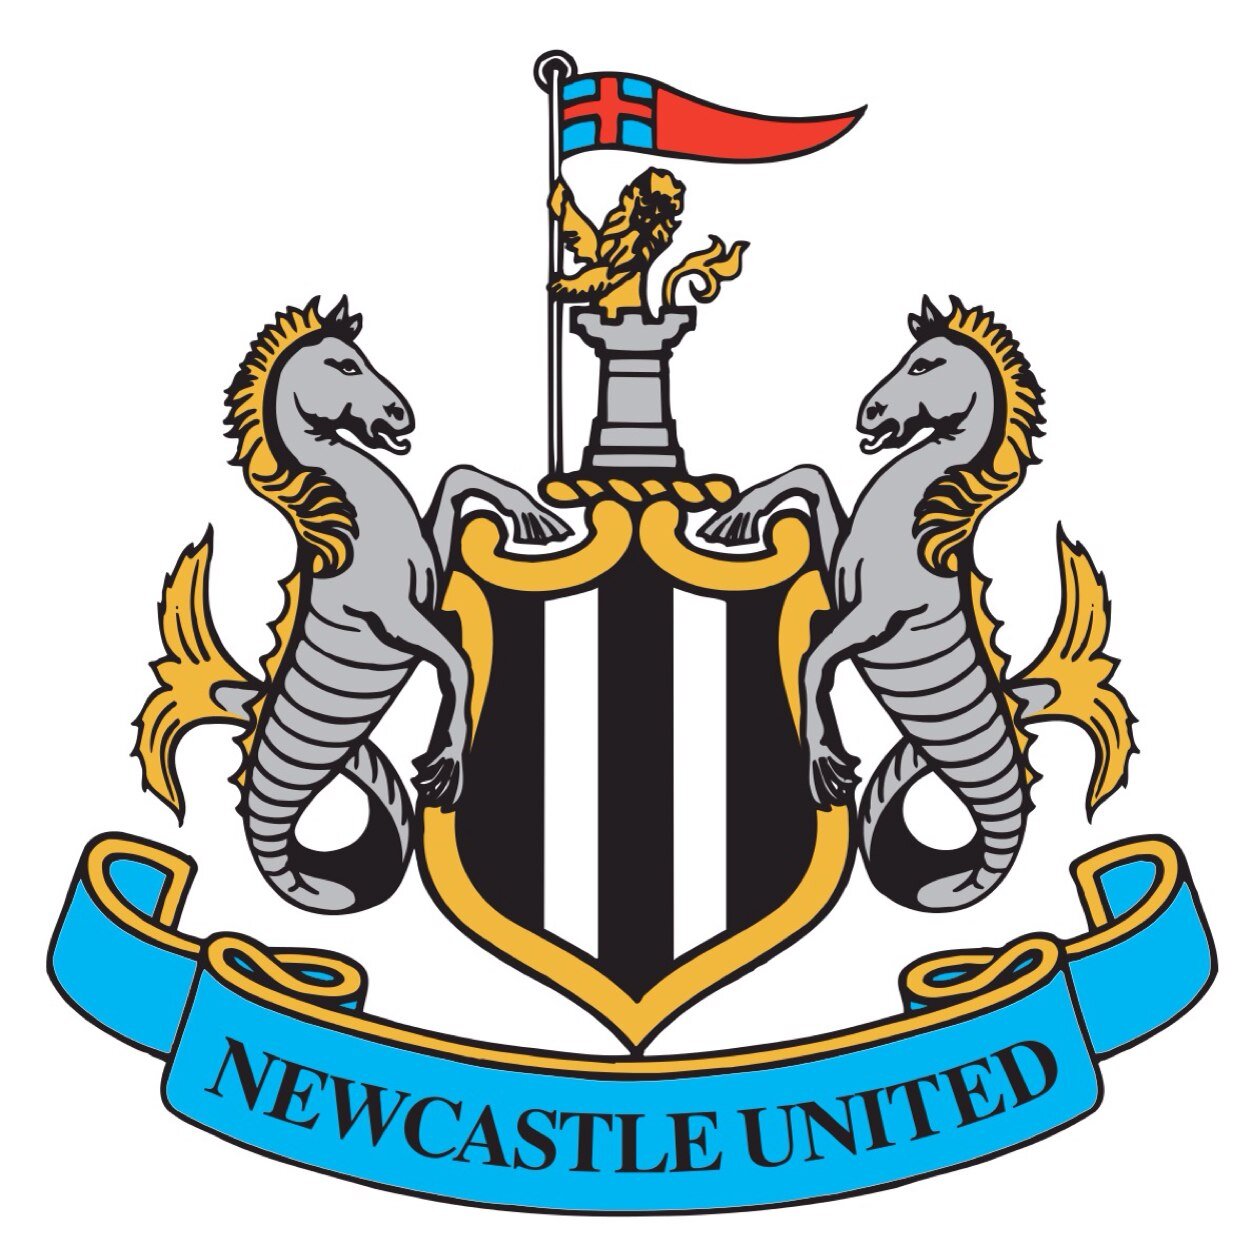 Mainly retweet #nufc and North East England posts. Feel free to tag me and I'll share your posts.